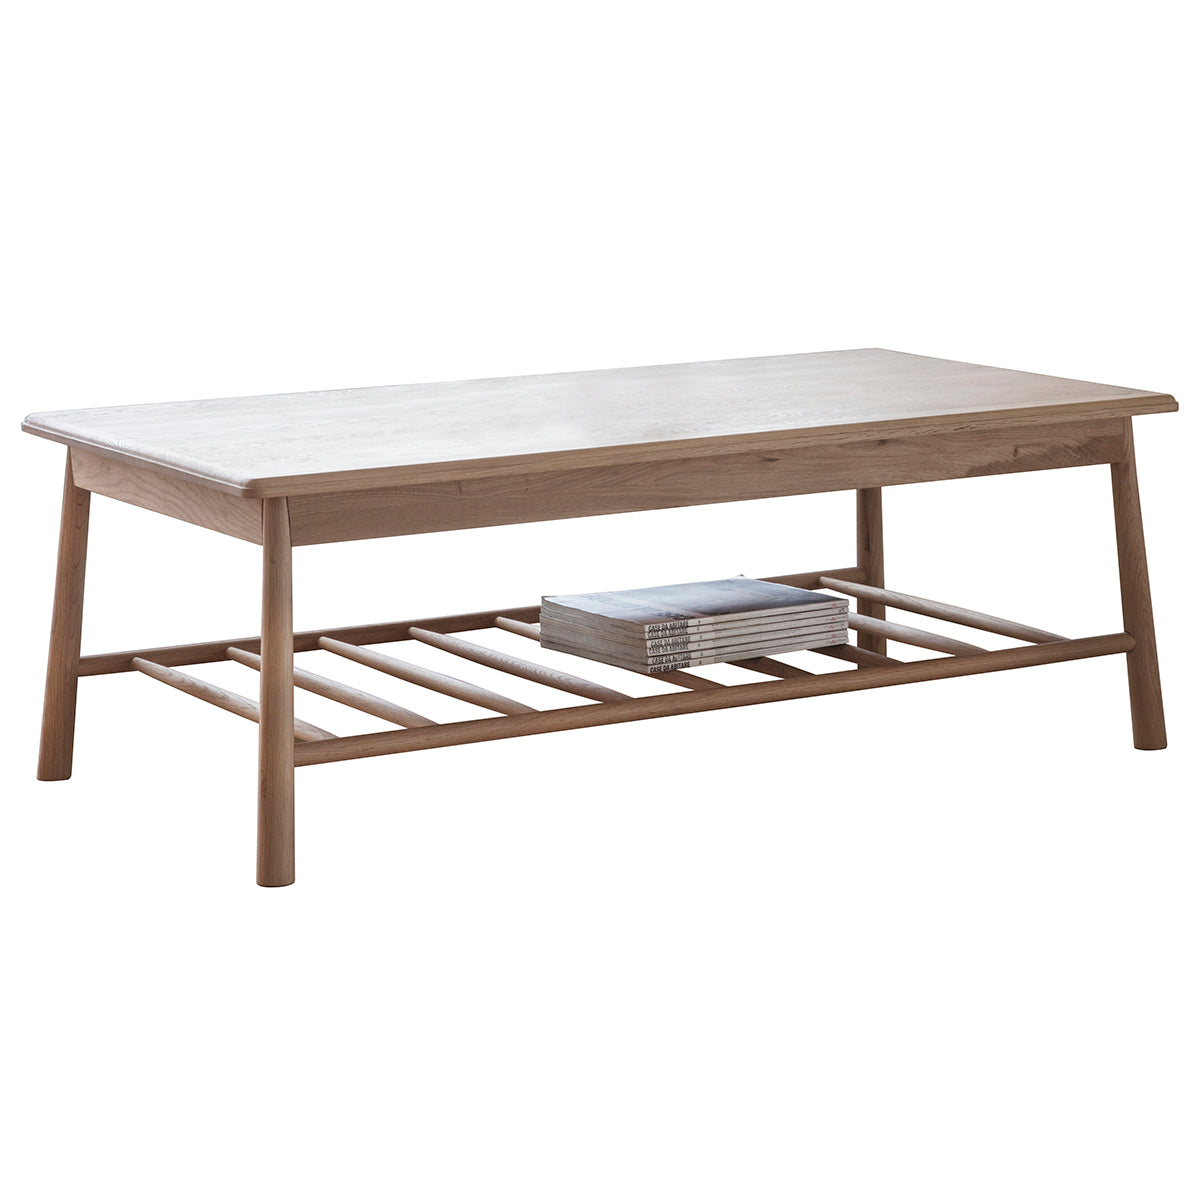 A Tigley Rect Coffee Table 1200x650x425mm with a magazine, perfect for interior decor and home furniture.